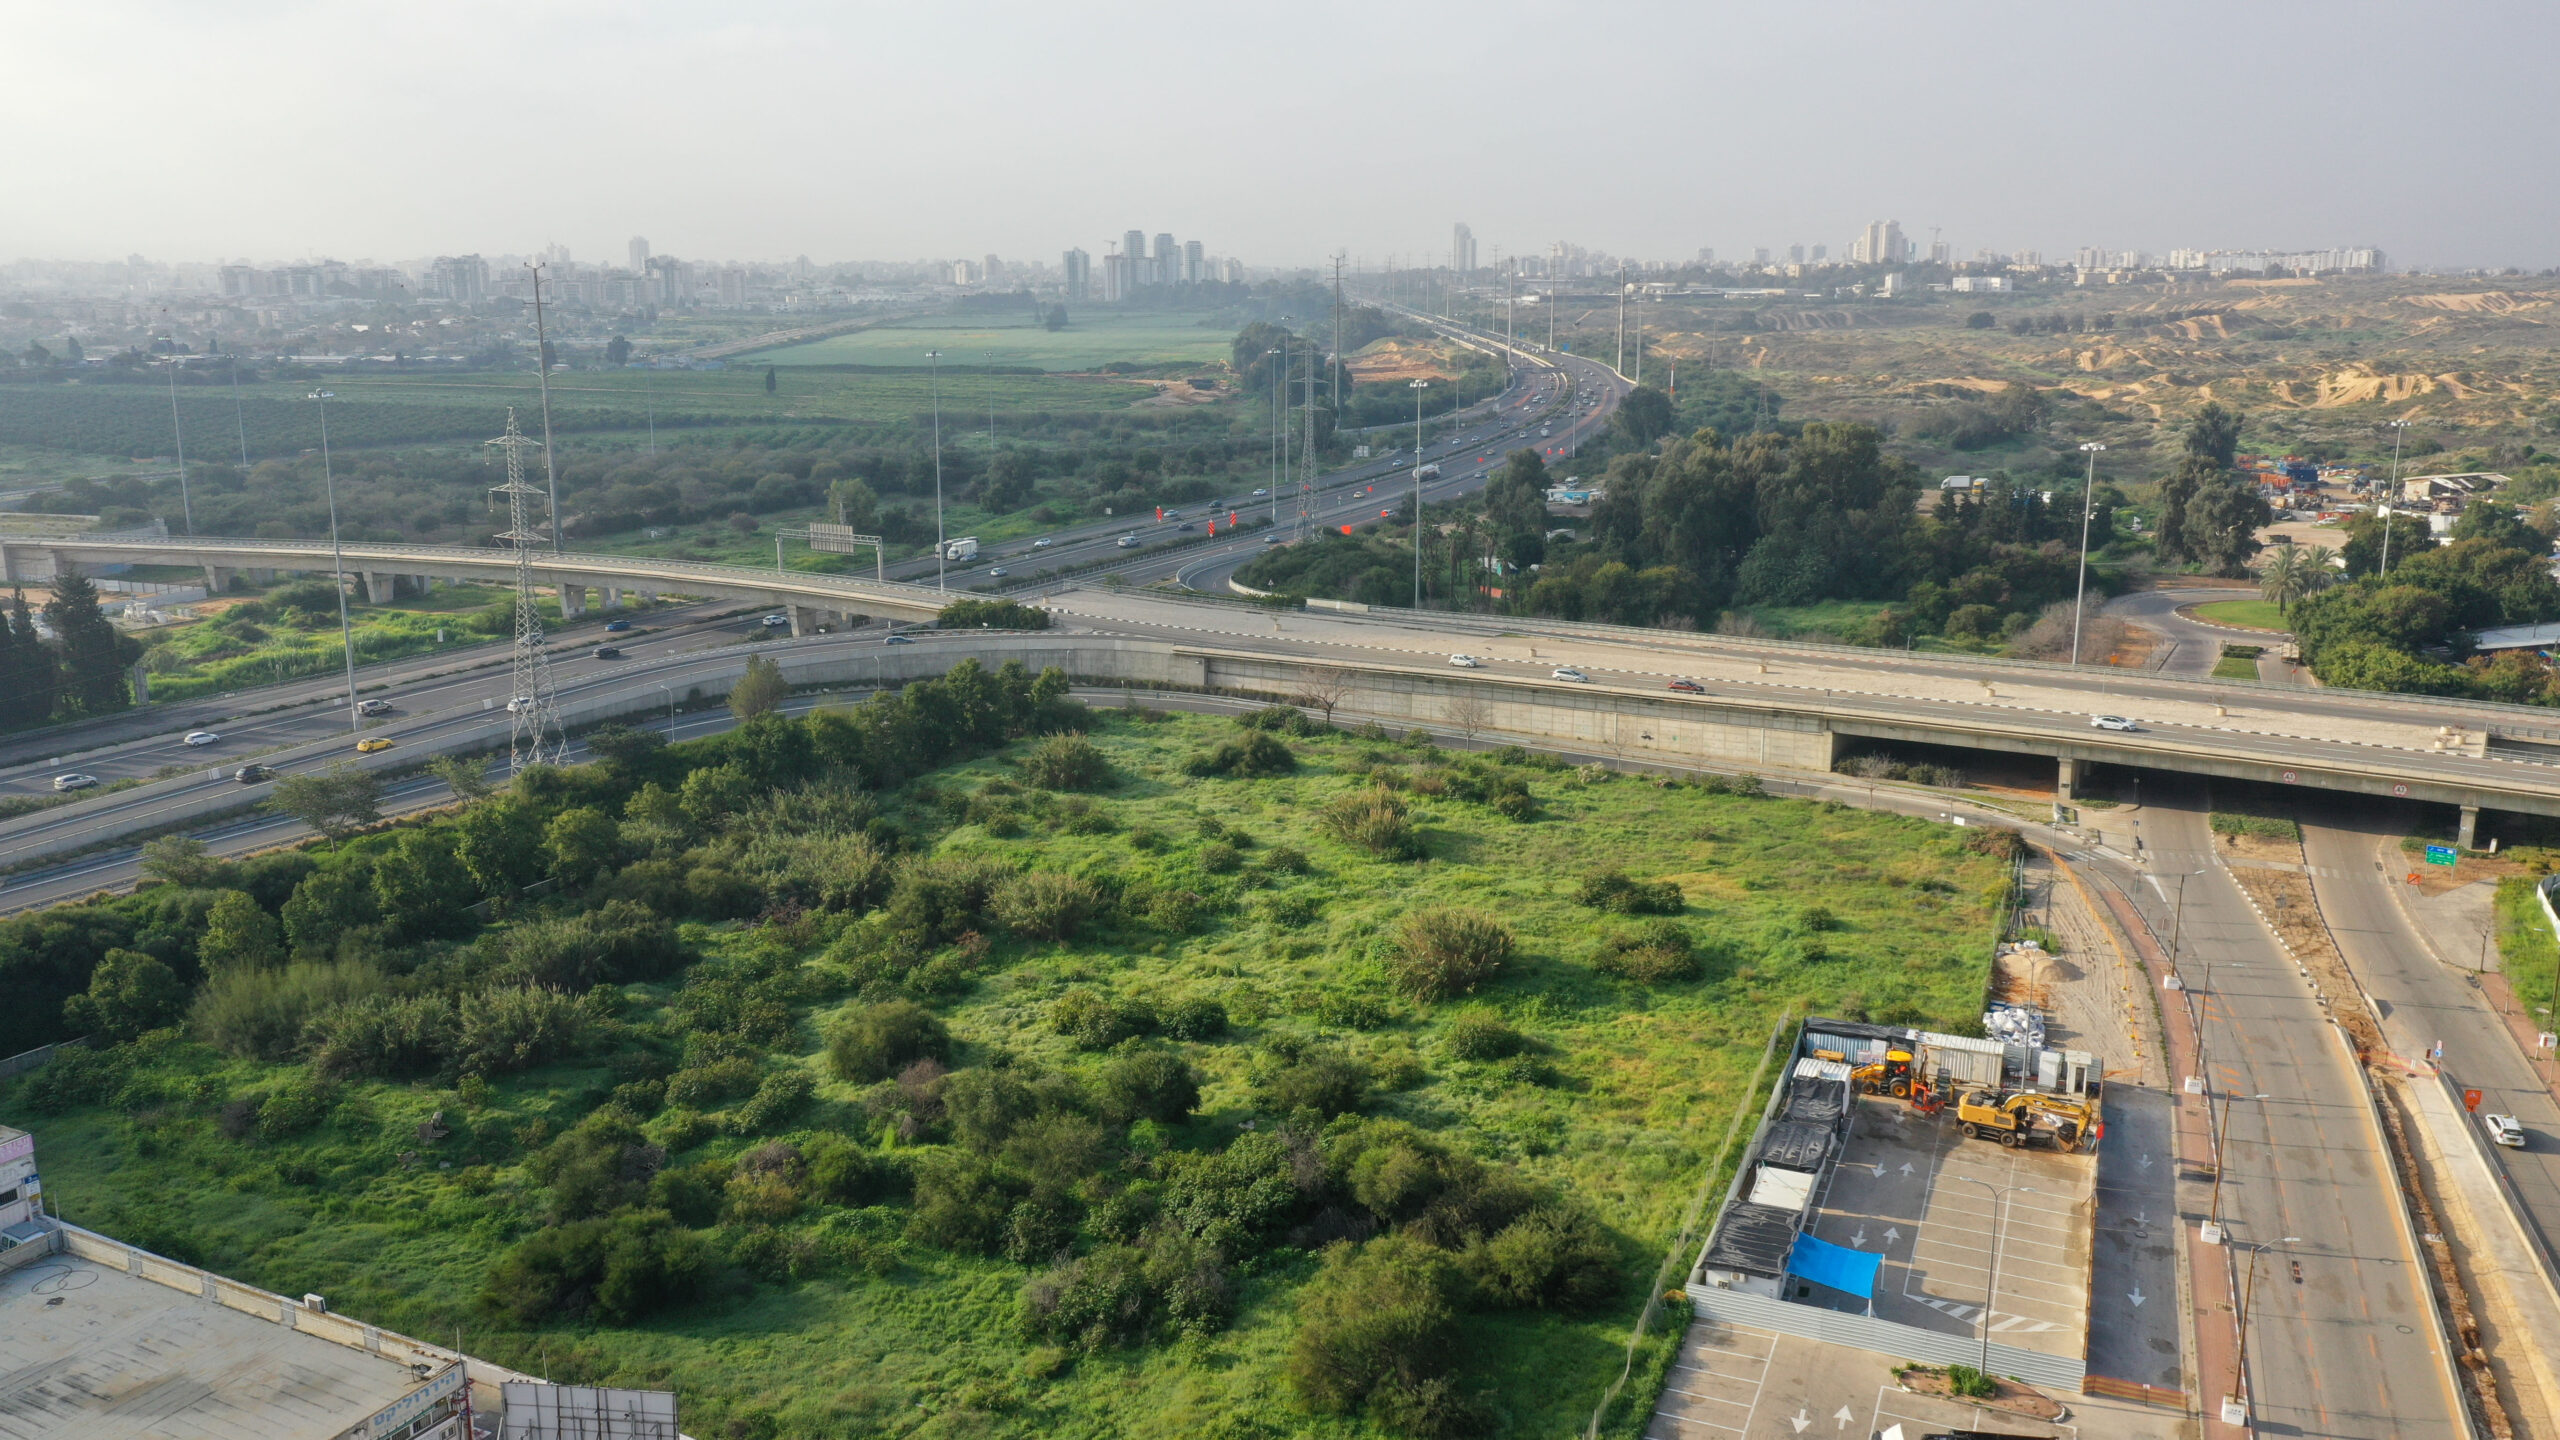 HaMerkava: Located on HaMerkava Street in Holon's industrial area, strategically positioned near transportation hubs including the Holon Interchange and the green line of the light rail system | Reality the Leading Group of Real Estate Investment Funds in Israel